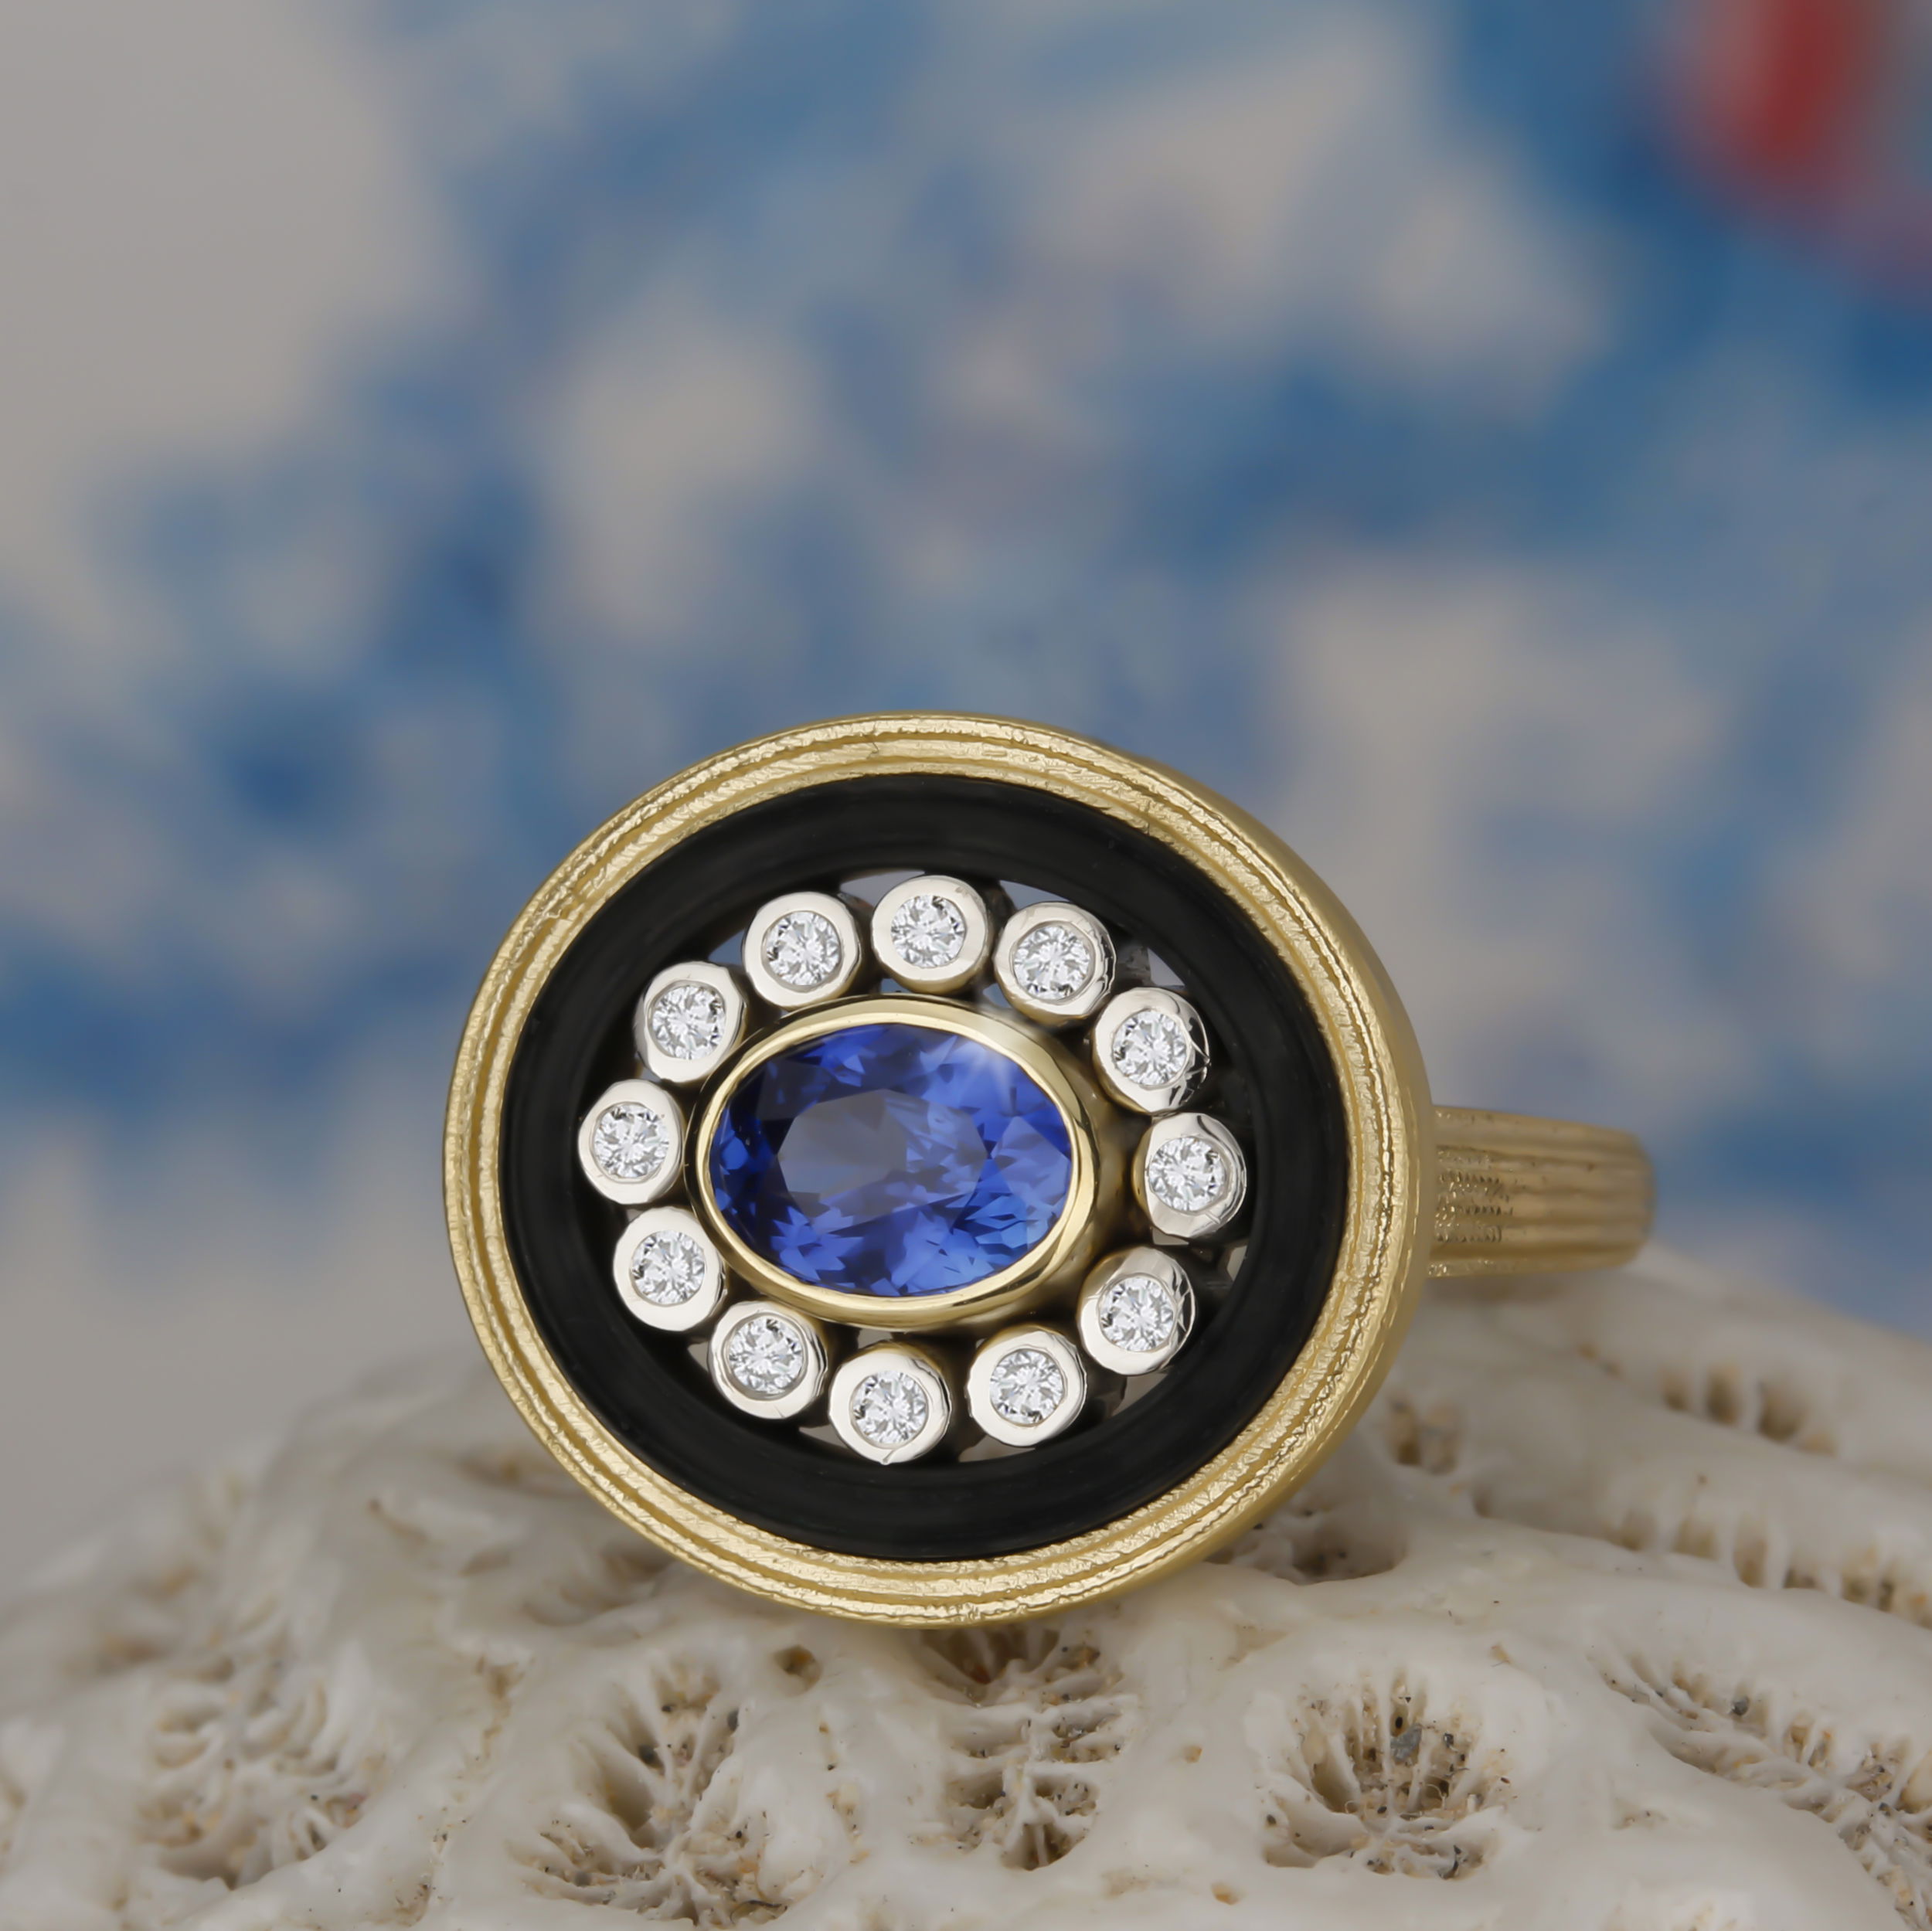 Paragon Oval Center Stone Ring with Sapphire and Diamonds in 18kt Yellow Gold and Black Chrome